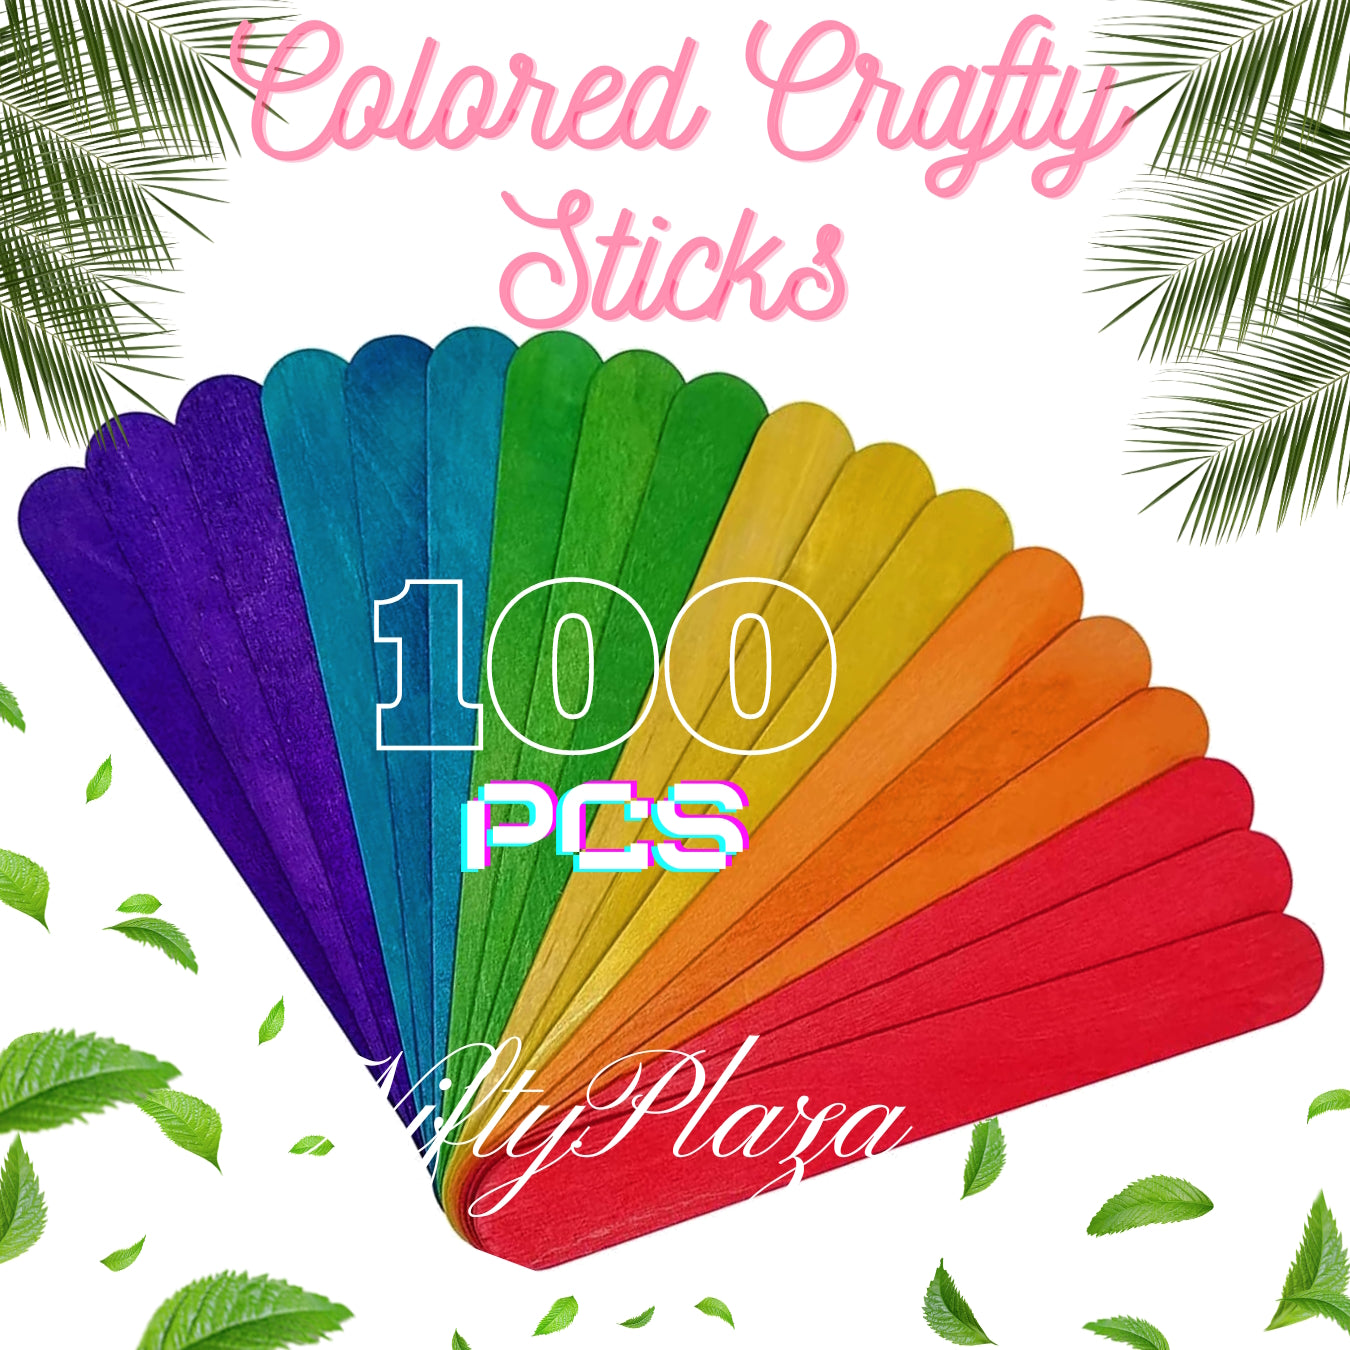 NiftyPlaza 100 Pieces Jumbo Craft Sticks, Multicolored for Building, Mixing, Creating Craft Projects